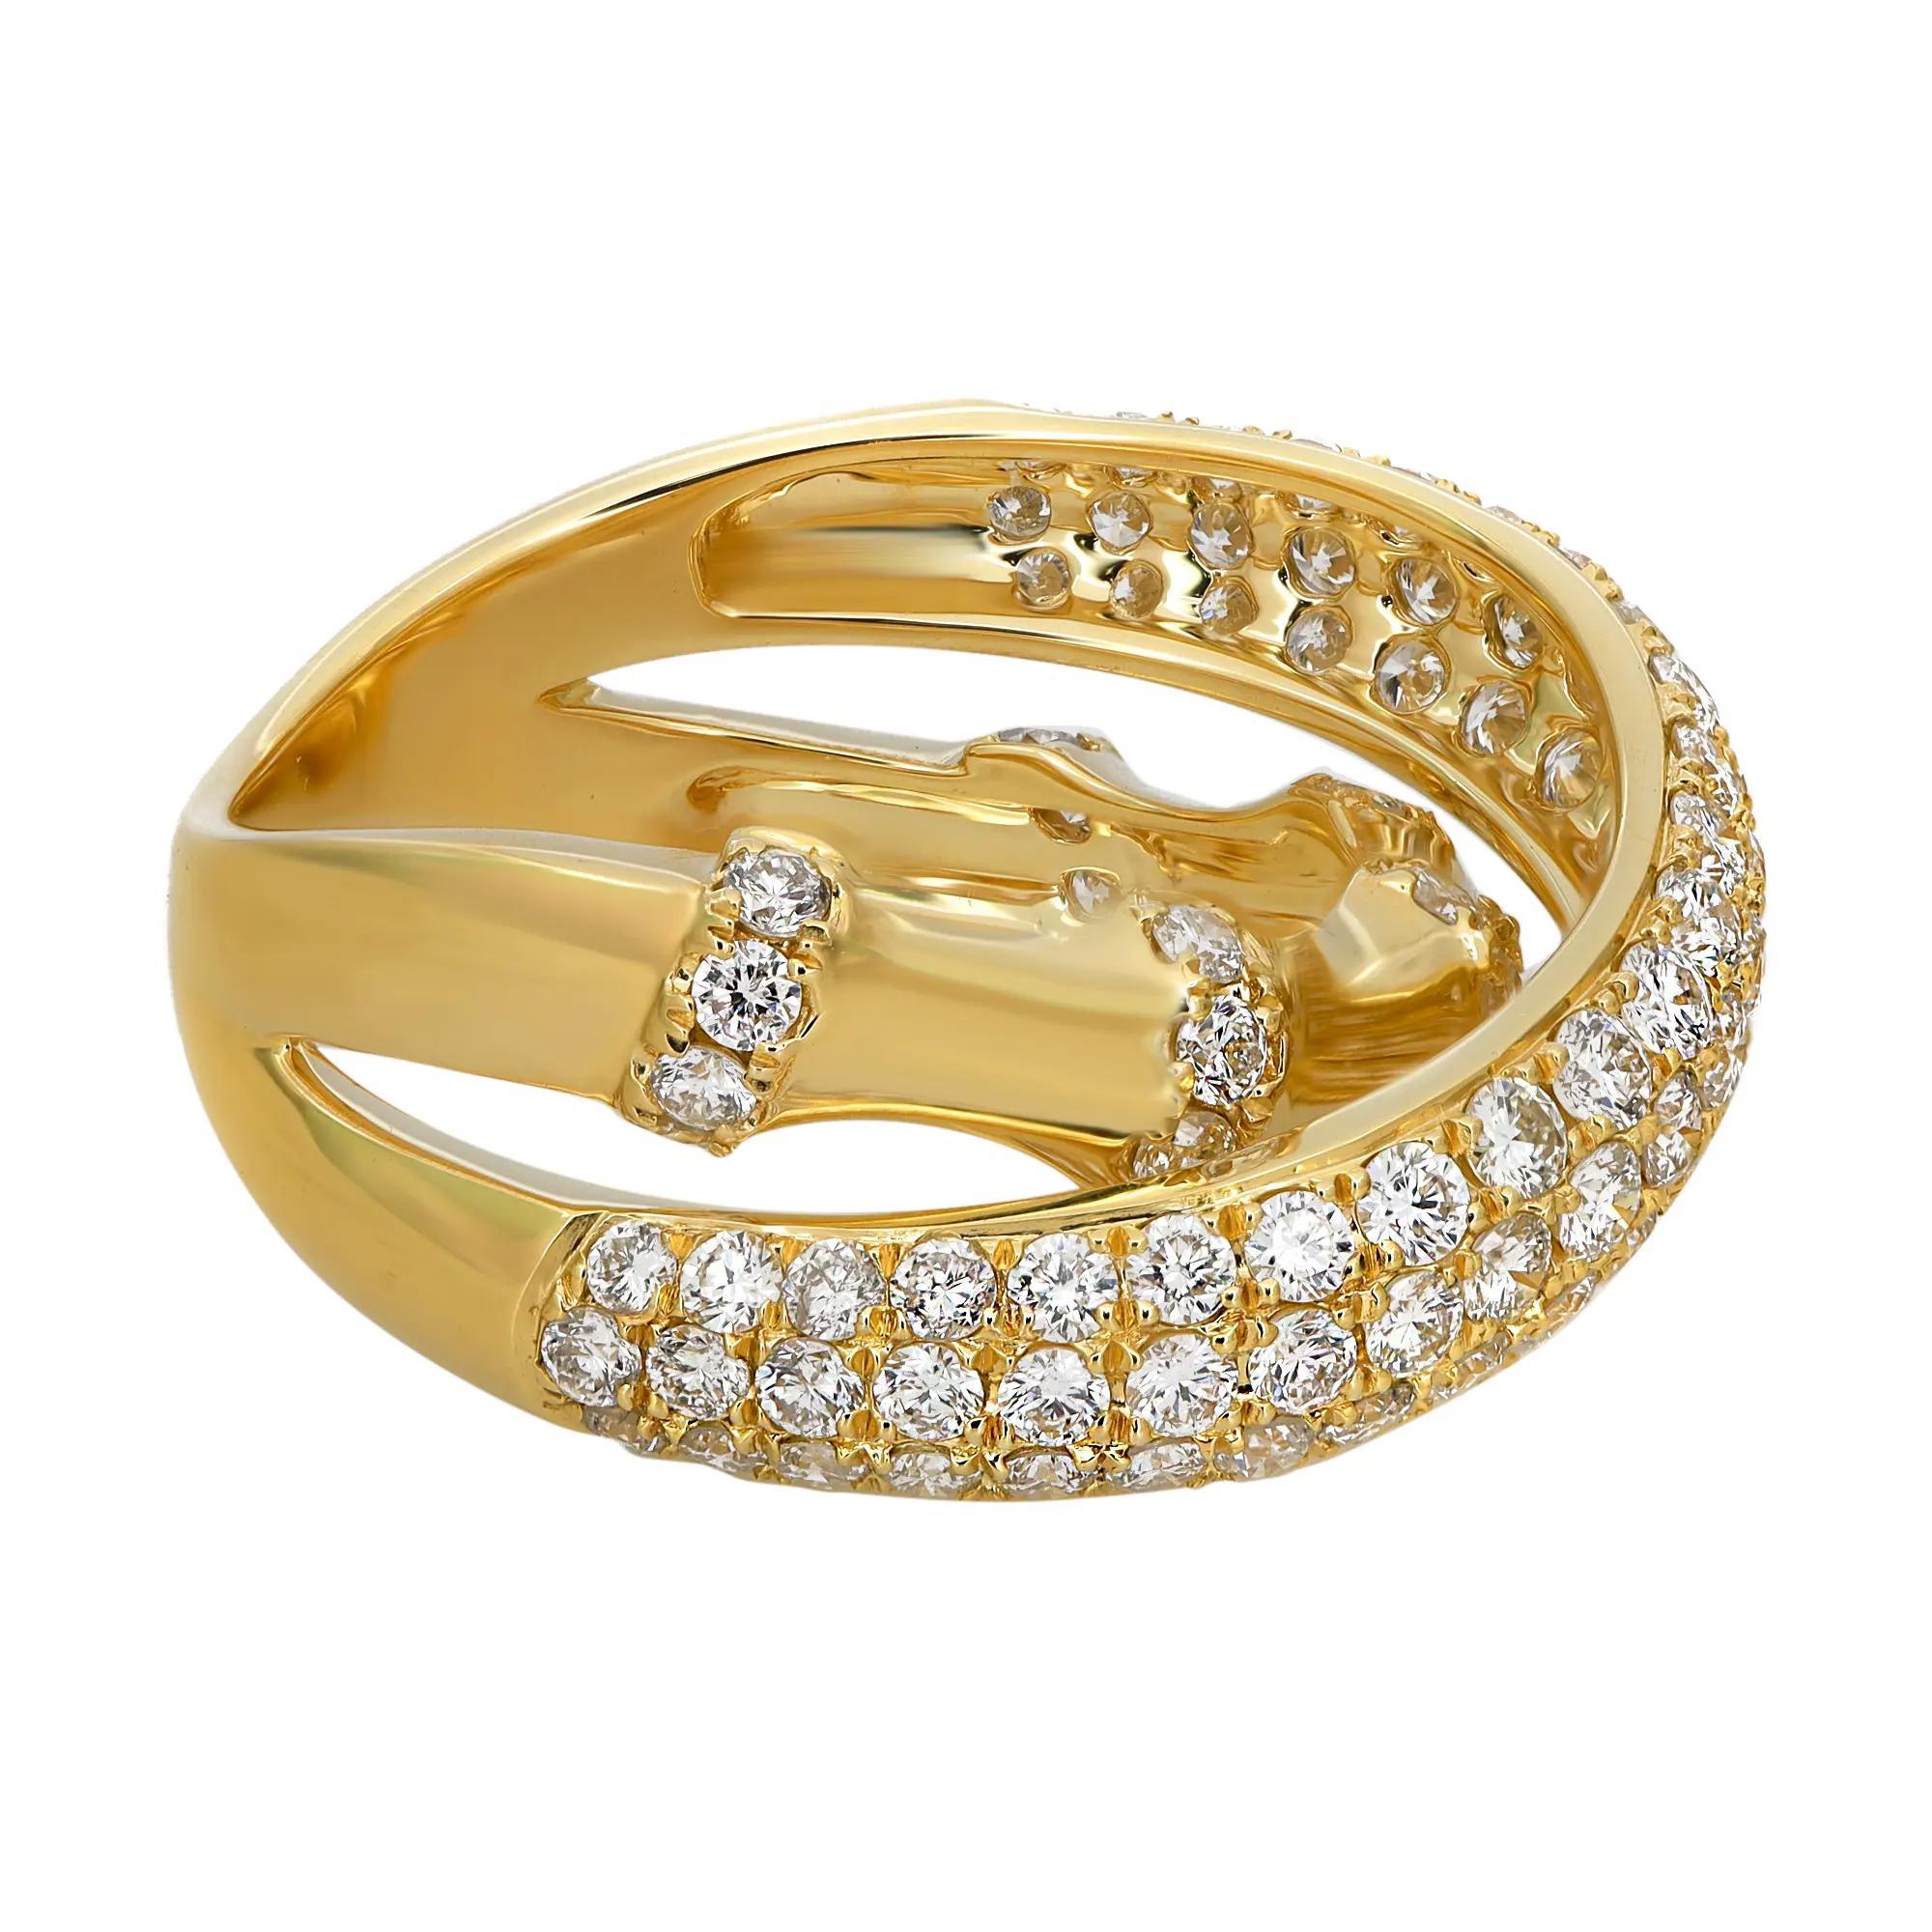 Modern Pave Set Round Cut Diamond Crossover Band Ring 18K Yellow Gold 1.71Ctw Size 6.5 For Sale